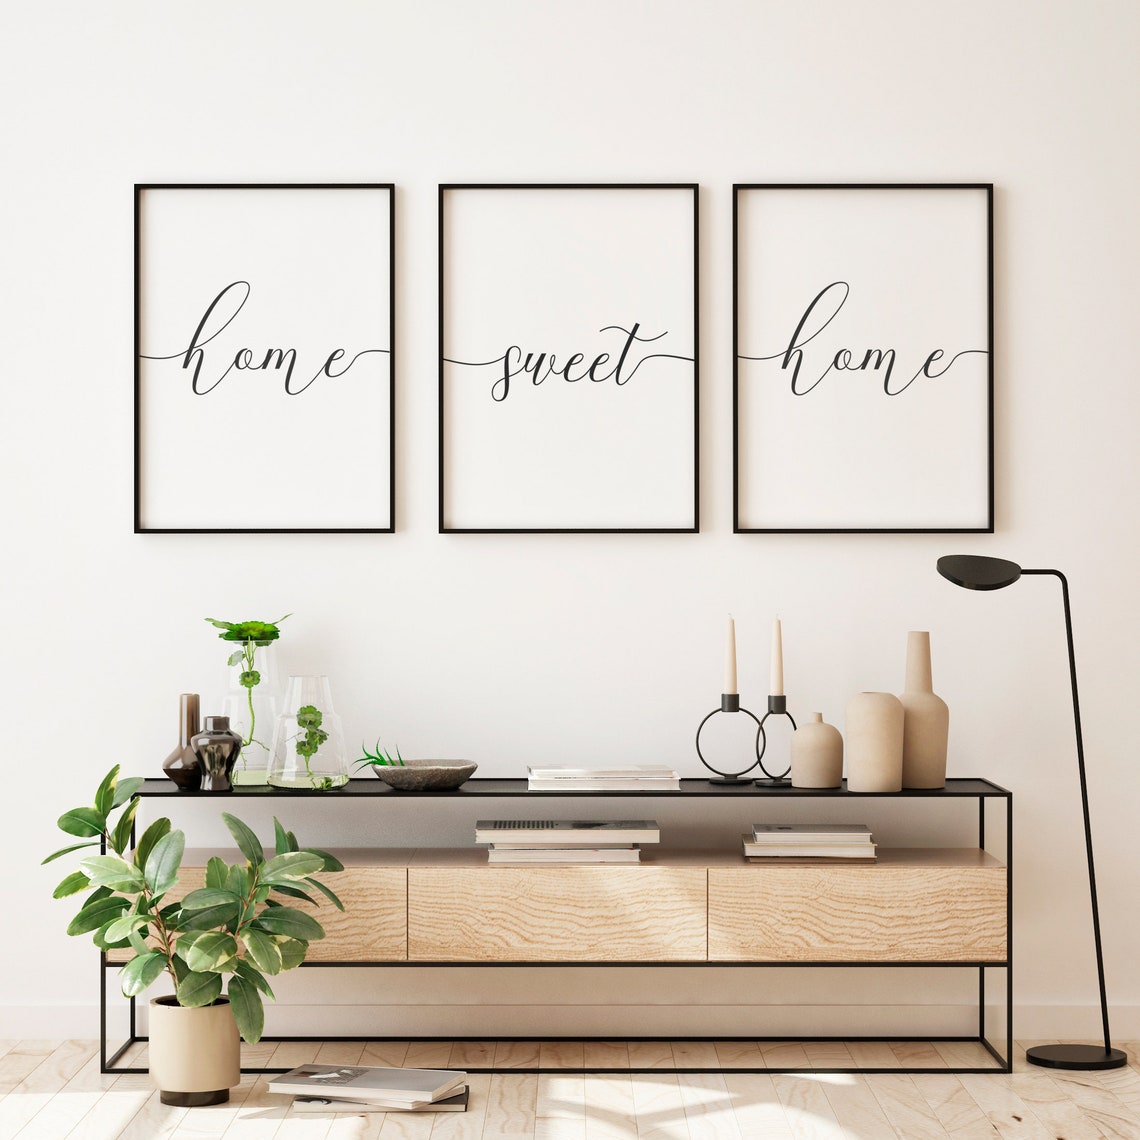 Sweet Home Wall Decor Sweet Home Sign Set of 3 Printable | Etsy